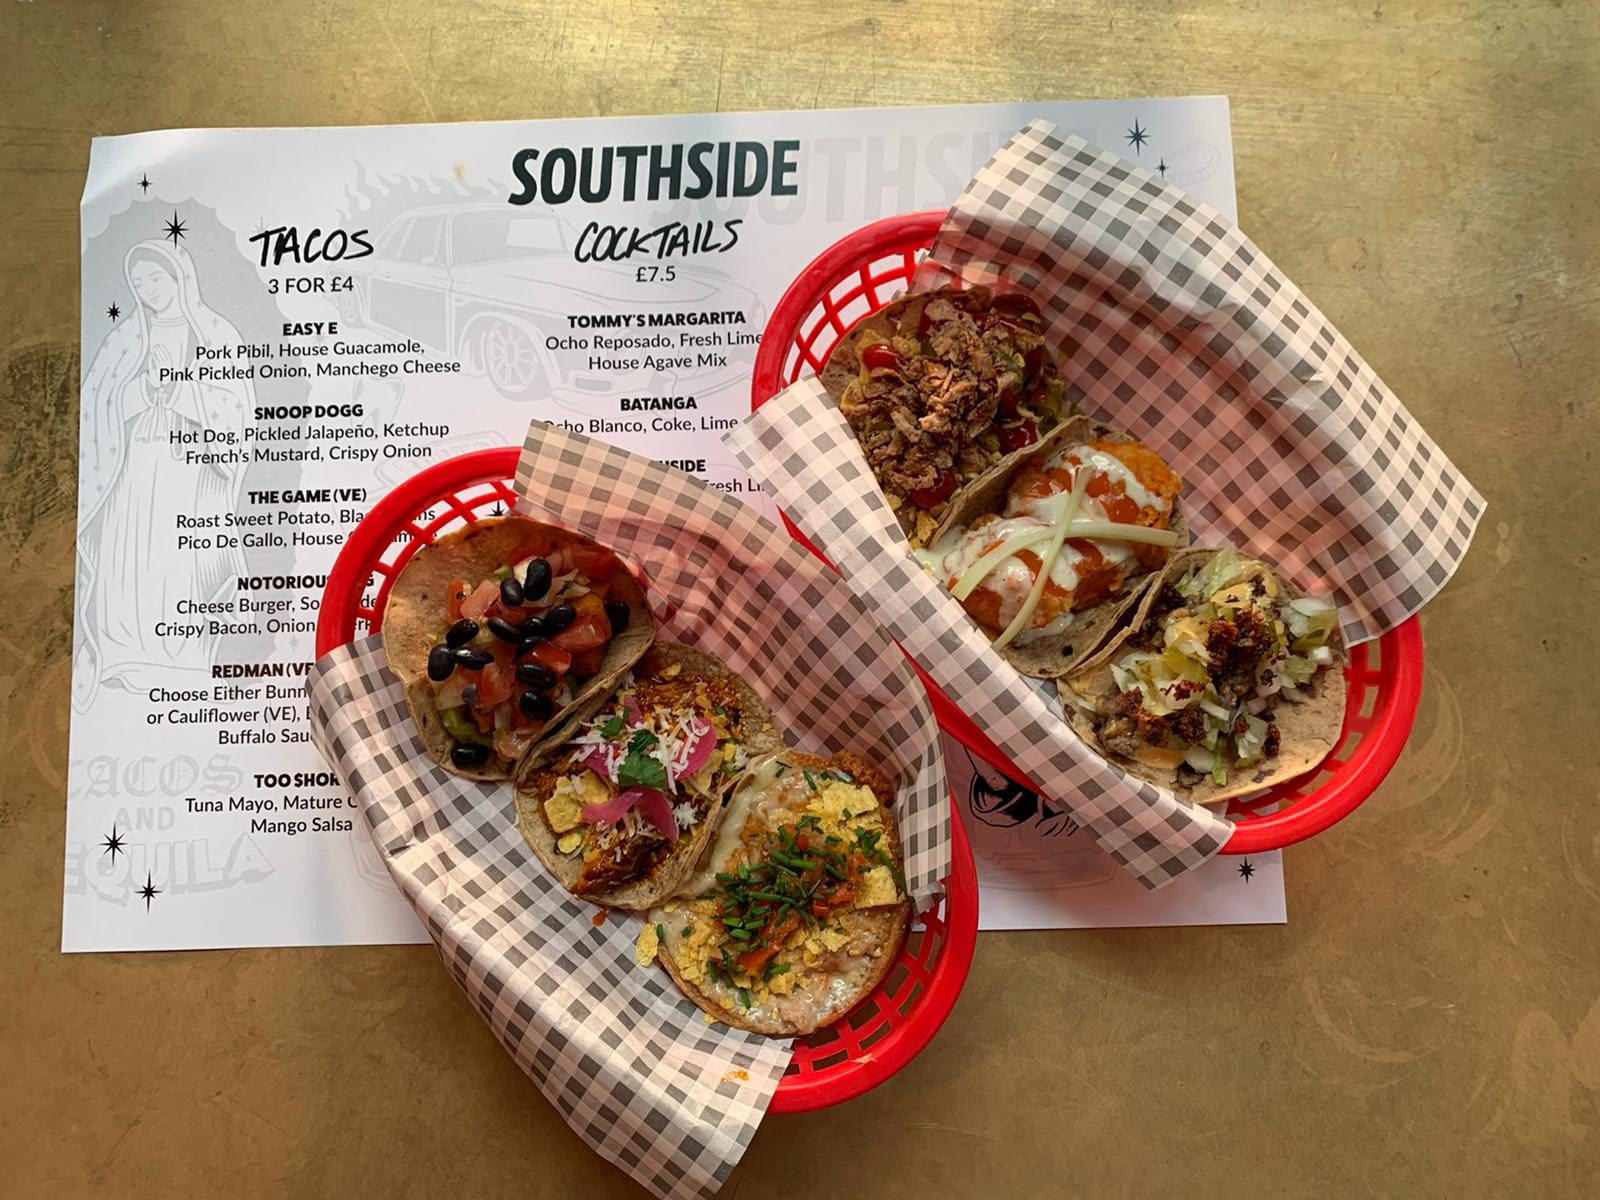 Take a walk on the Southside - VIVA checks out the new taco & tequila joint in town!